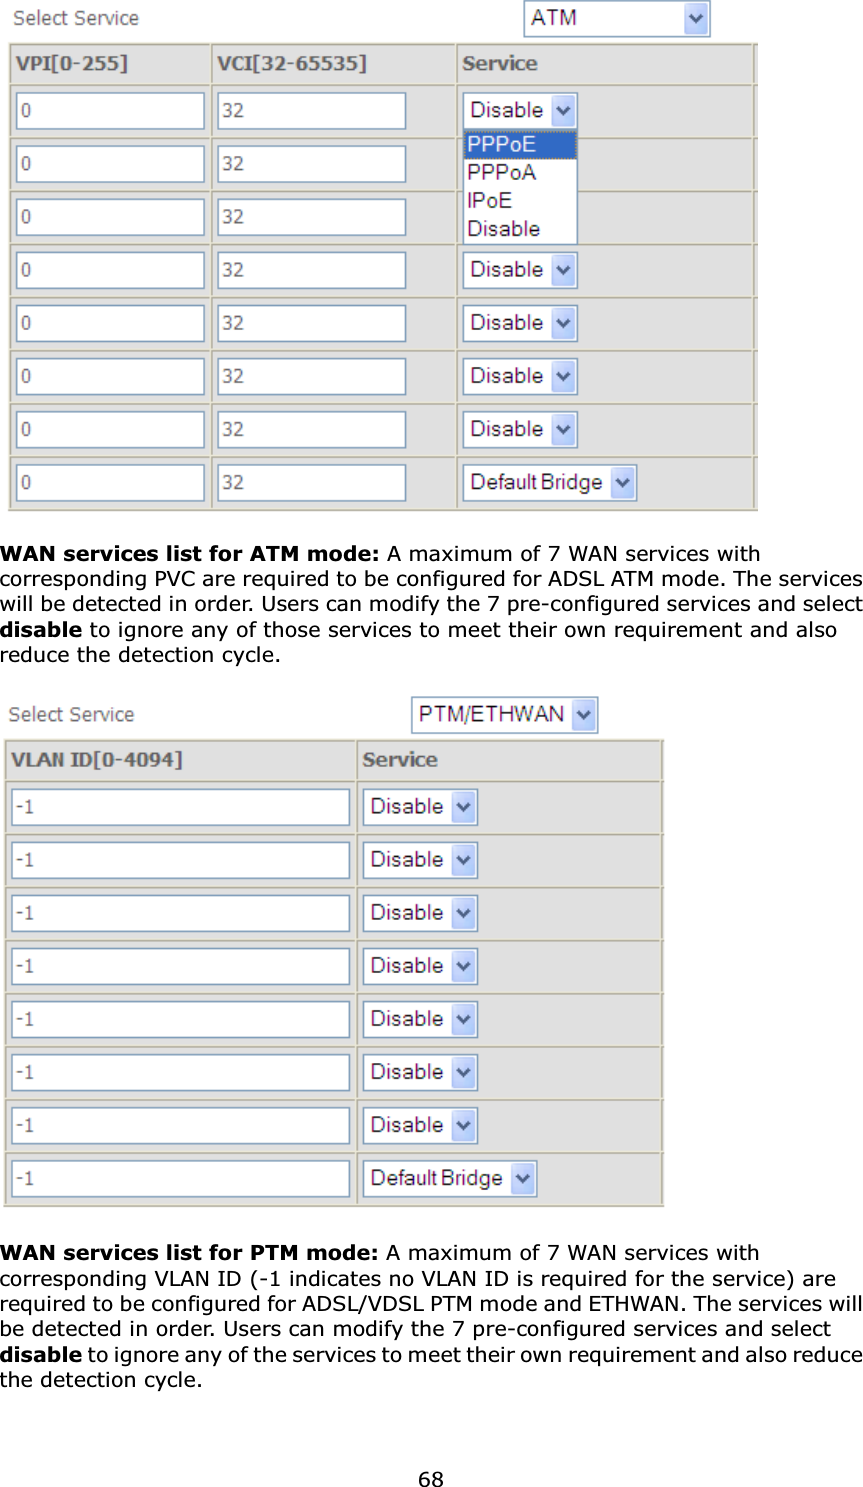  68  WAN services list for ATM mode: A maximum of 7 WAN services with corresponding PVC are required to be configured for ADSL ATM mode. The services will be detected in order. Users can modify the 7 pre-configured services and select disable to ignore any of those services to meet their own requirement and also reduce the detection cycle.    WAN services list for PTM mode: A maximum of 7 WAN services with corresponding VLAN ID (-1 indicates no VLAN ID is required for the service) are required to be configured for ADSL/VDSL PTM mode and ETHWAN. The services will be detected in order. Users can modify the 7 pre-configured services and select disable to ignore any of the services to meet their own requirement and also reduce the detection cycle.  